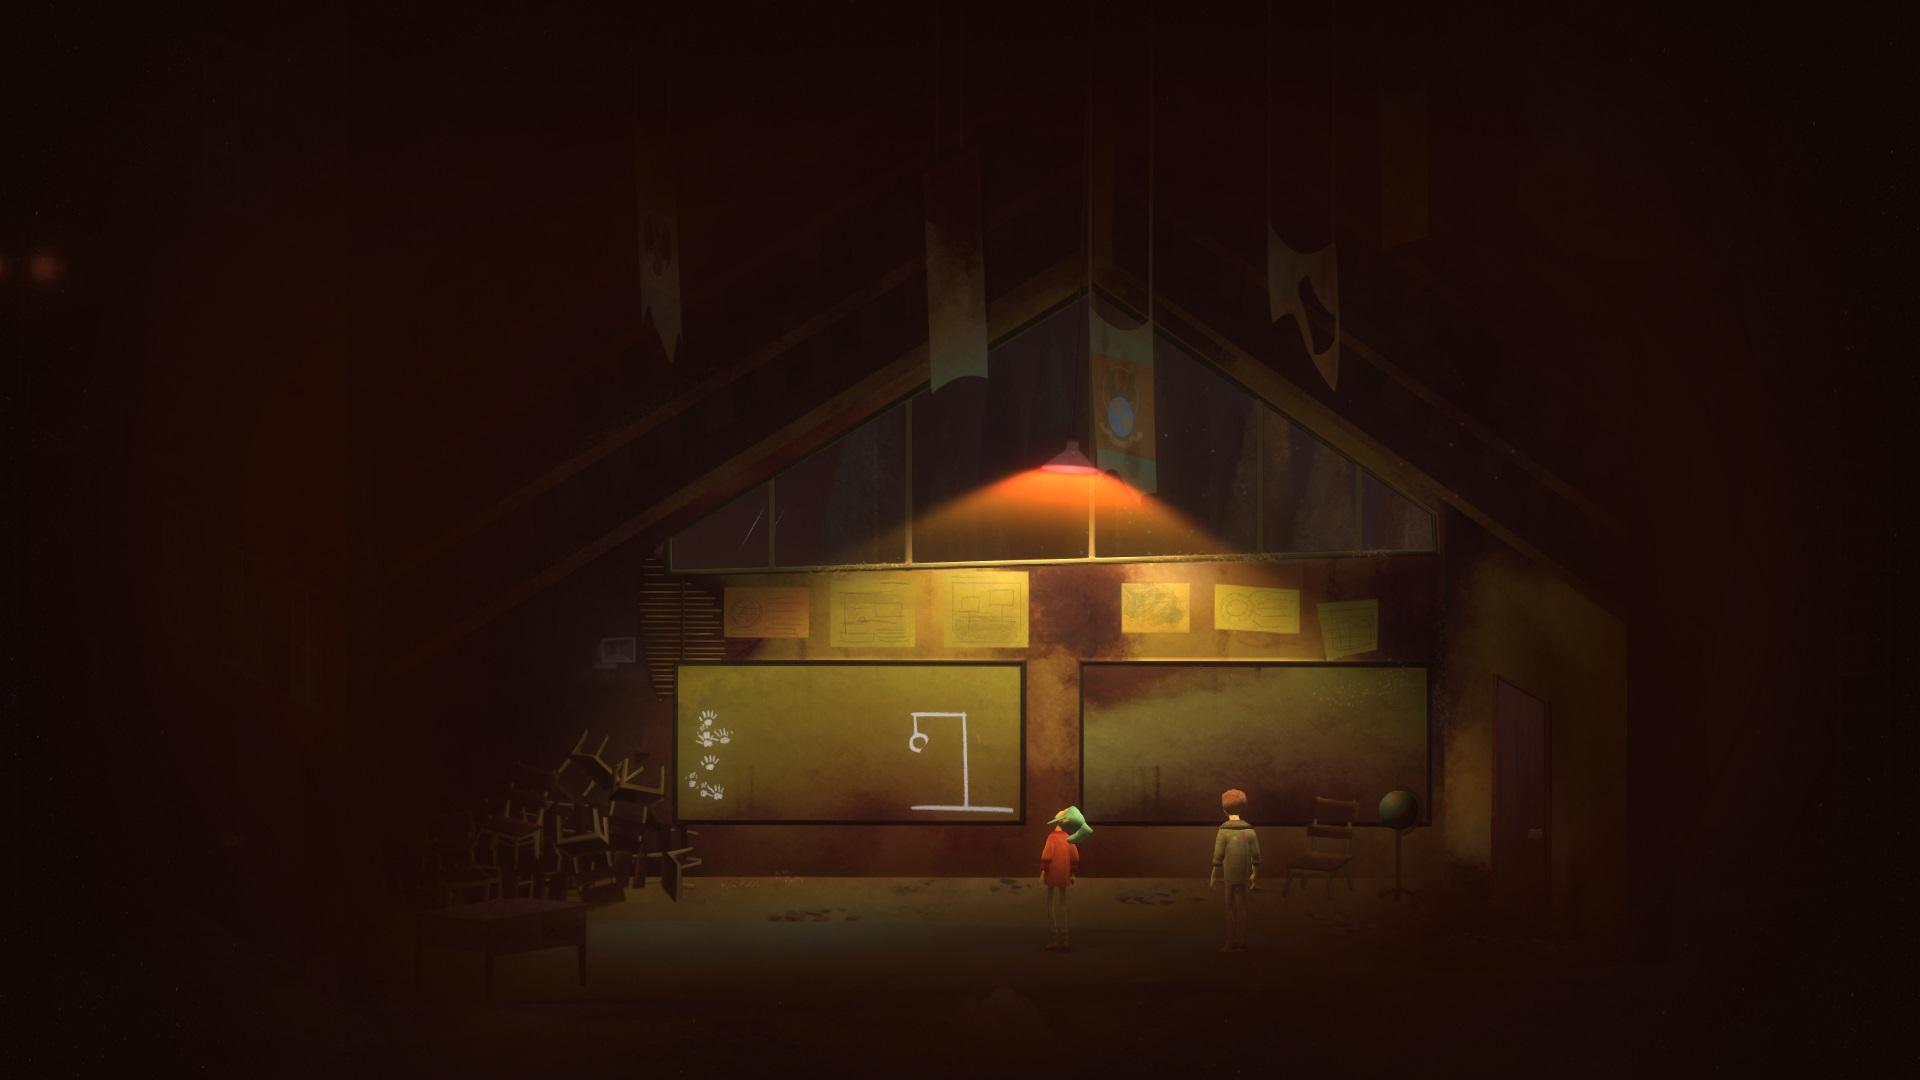 oxenfree game letters